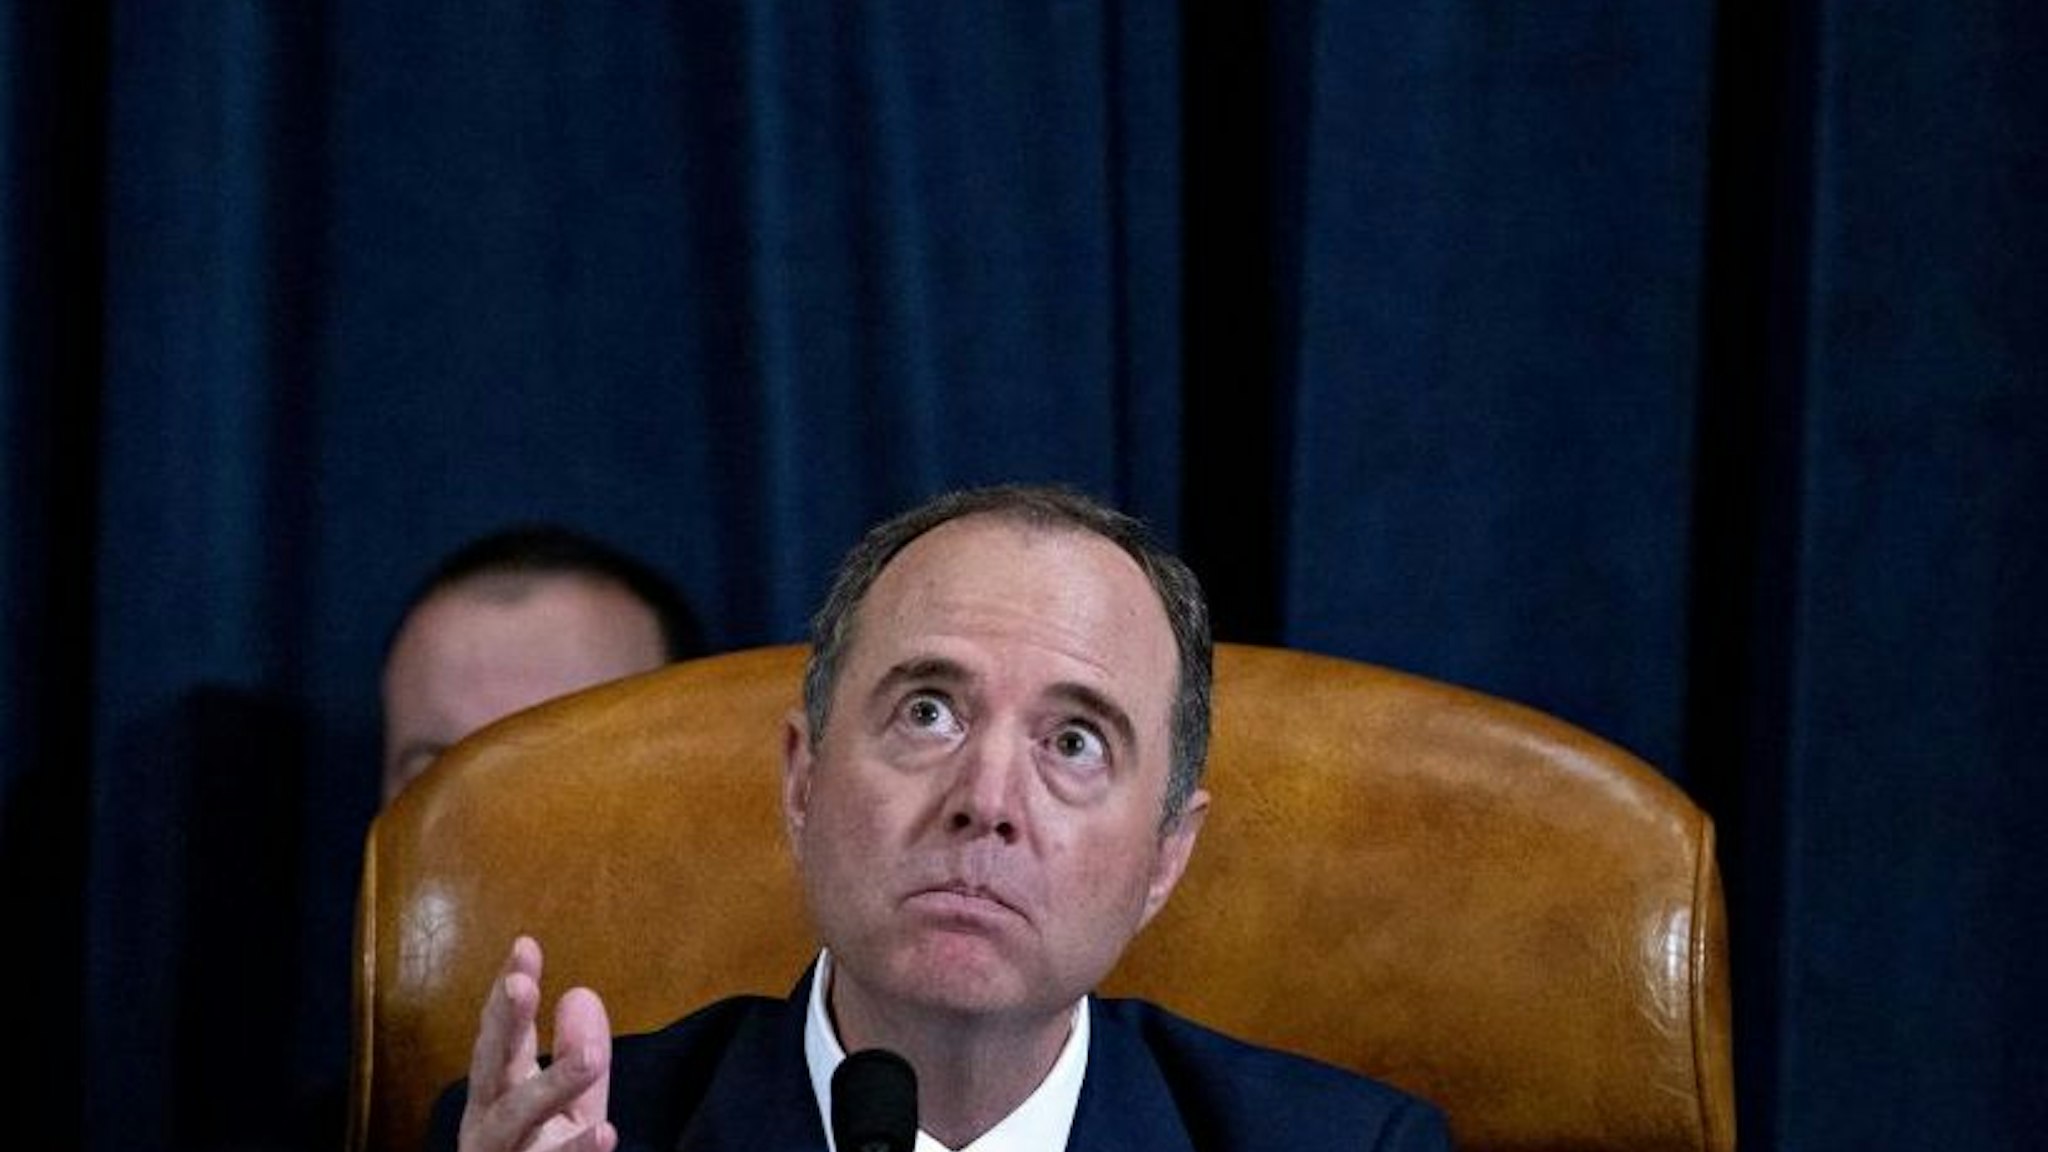 Representative Adam Schiff, a Democrat from California and chairman of the House Intelligence Committee, makes a closing statement during an impeachment inquiry hearing in Washington, D.C., U.S., on Thursday, Nov. 21, 2019. The committee hears from nine witnesses in open hearings this week in the impeachment inquiry into President Donald Trump.